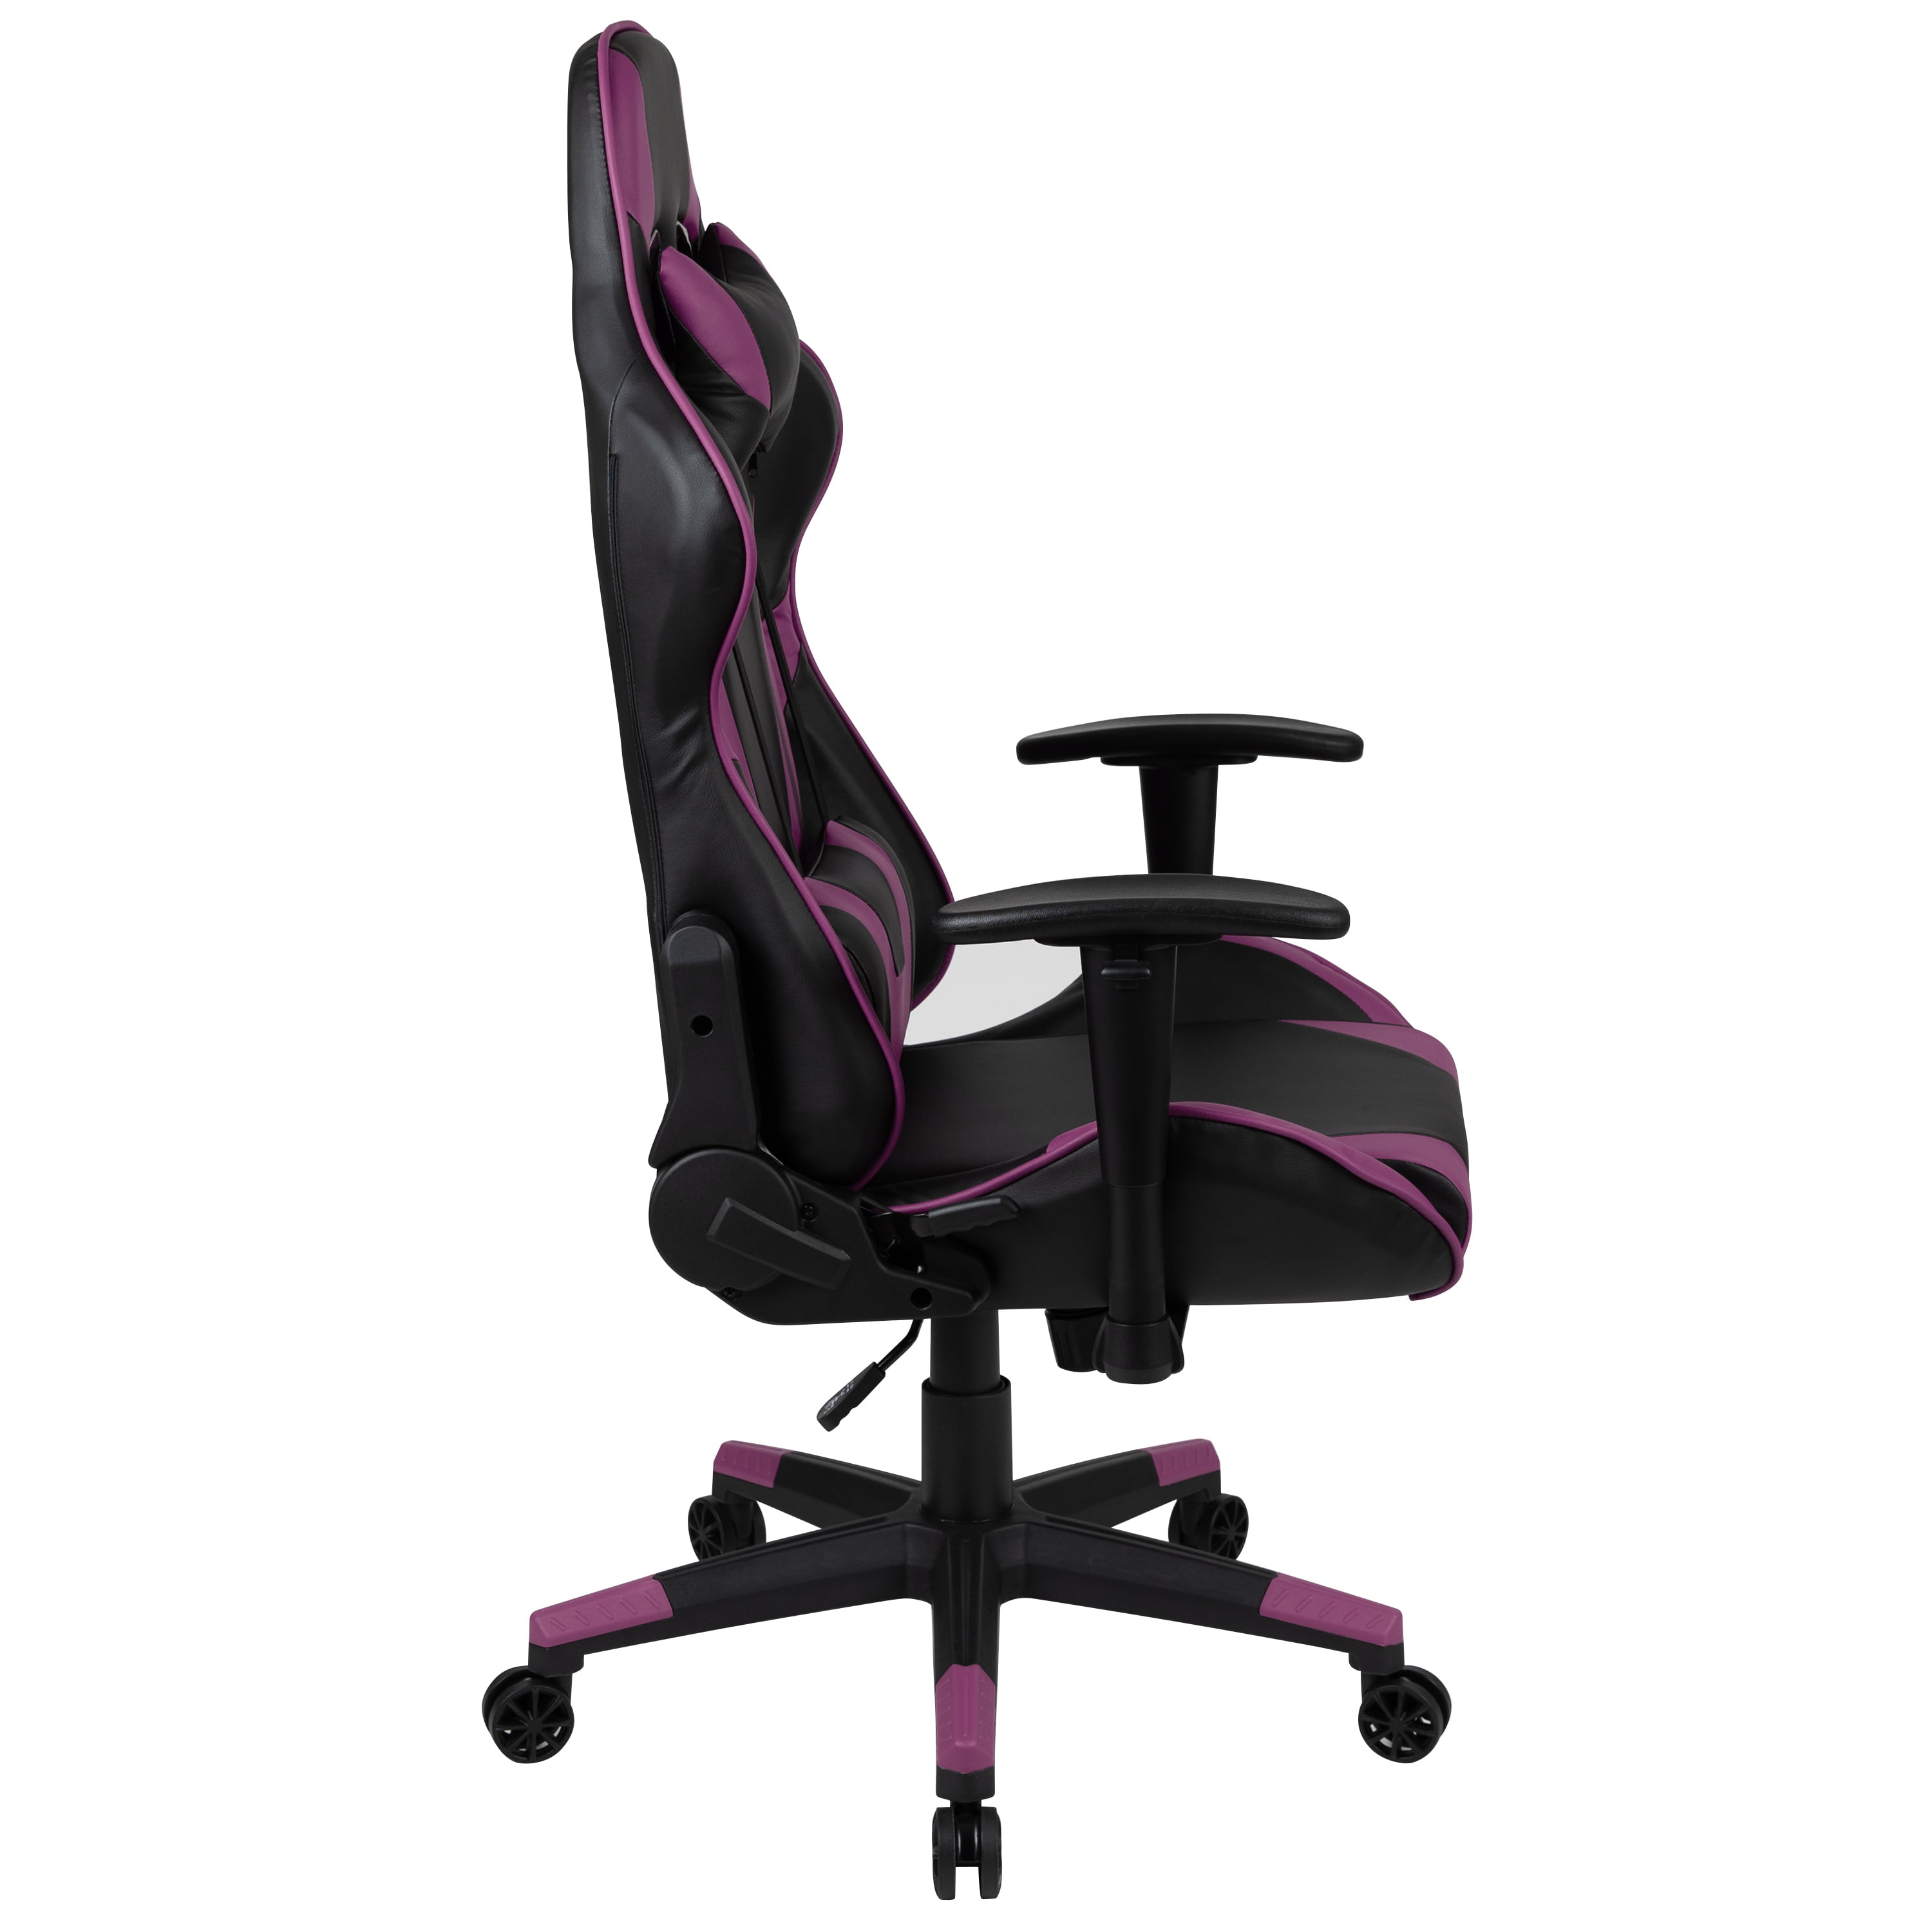 BlackArc High Reclining Gaming Chair in Black & Purple Faux Leather -Height Adjustable - Headrest & Support Pillows - Walmart.com